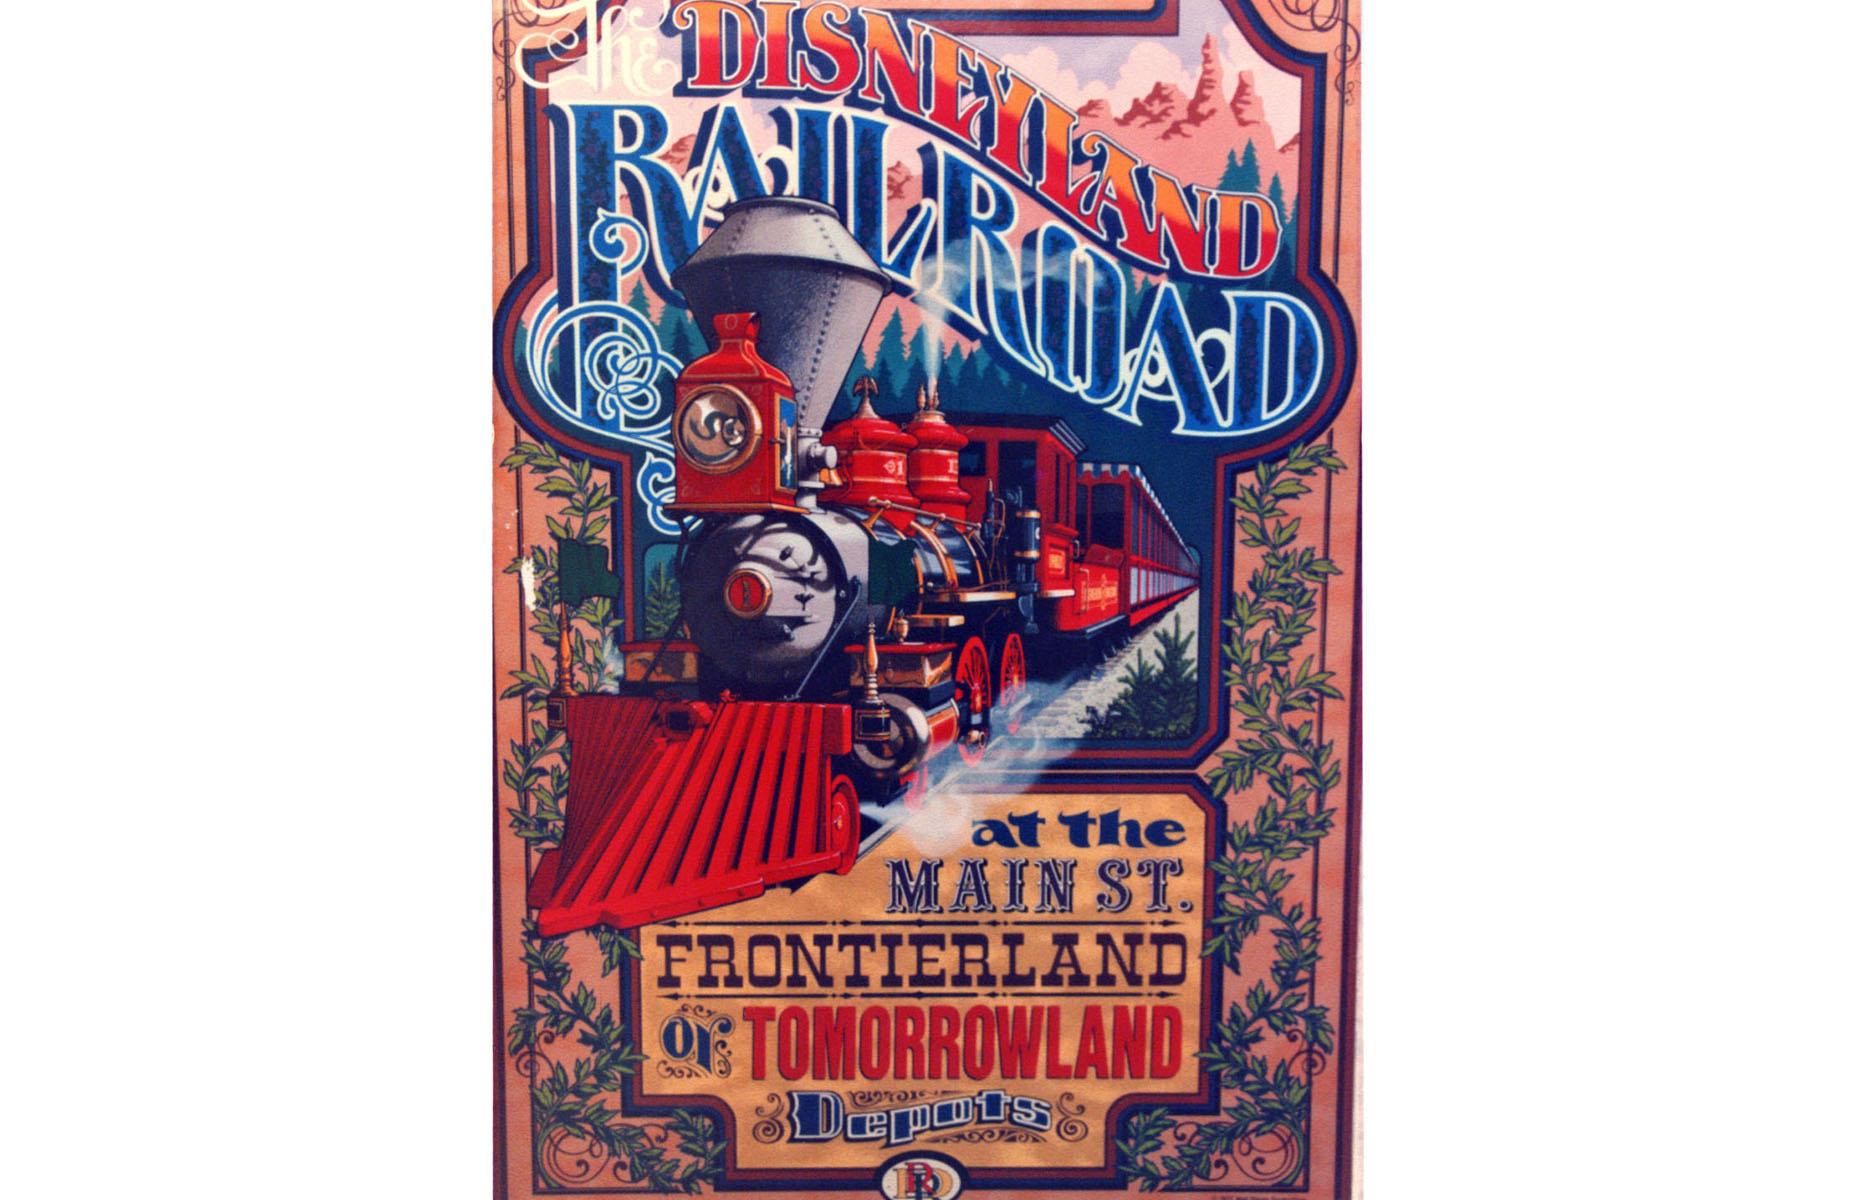 <p>This 1980s Disney advert oozes nostalgia. It promotes the Disneyland Railroad (once the Santa Fe and Disneyland Railroad), which is tipped as one of Walt Disney's own favorite attractions. The train rattles across the park, passing through lands including Old West-themed Frontierland. This eye-catching poster shows off the jolly red locomotive with a frame of pretty greenery and red pinnacles rising in the background.</p>  <p><a href="https://www.loveexploring.com/galleries/77151/inside-americas-abandoned-theme-parks?page=1"><strong>Now take a look inside America's abandoned theme parks</strong></a></p>